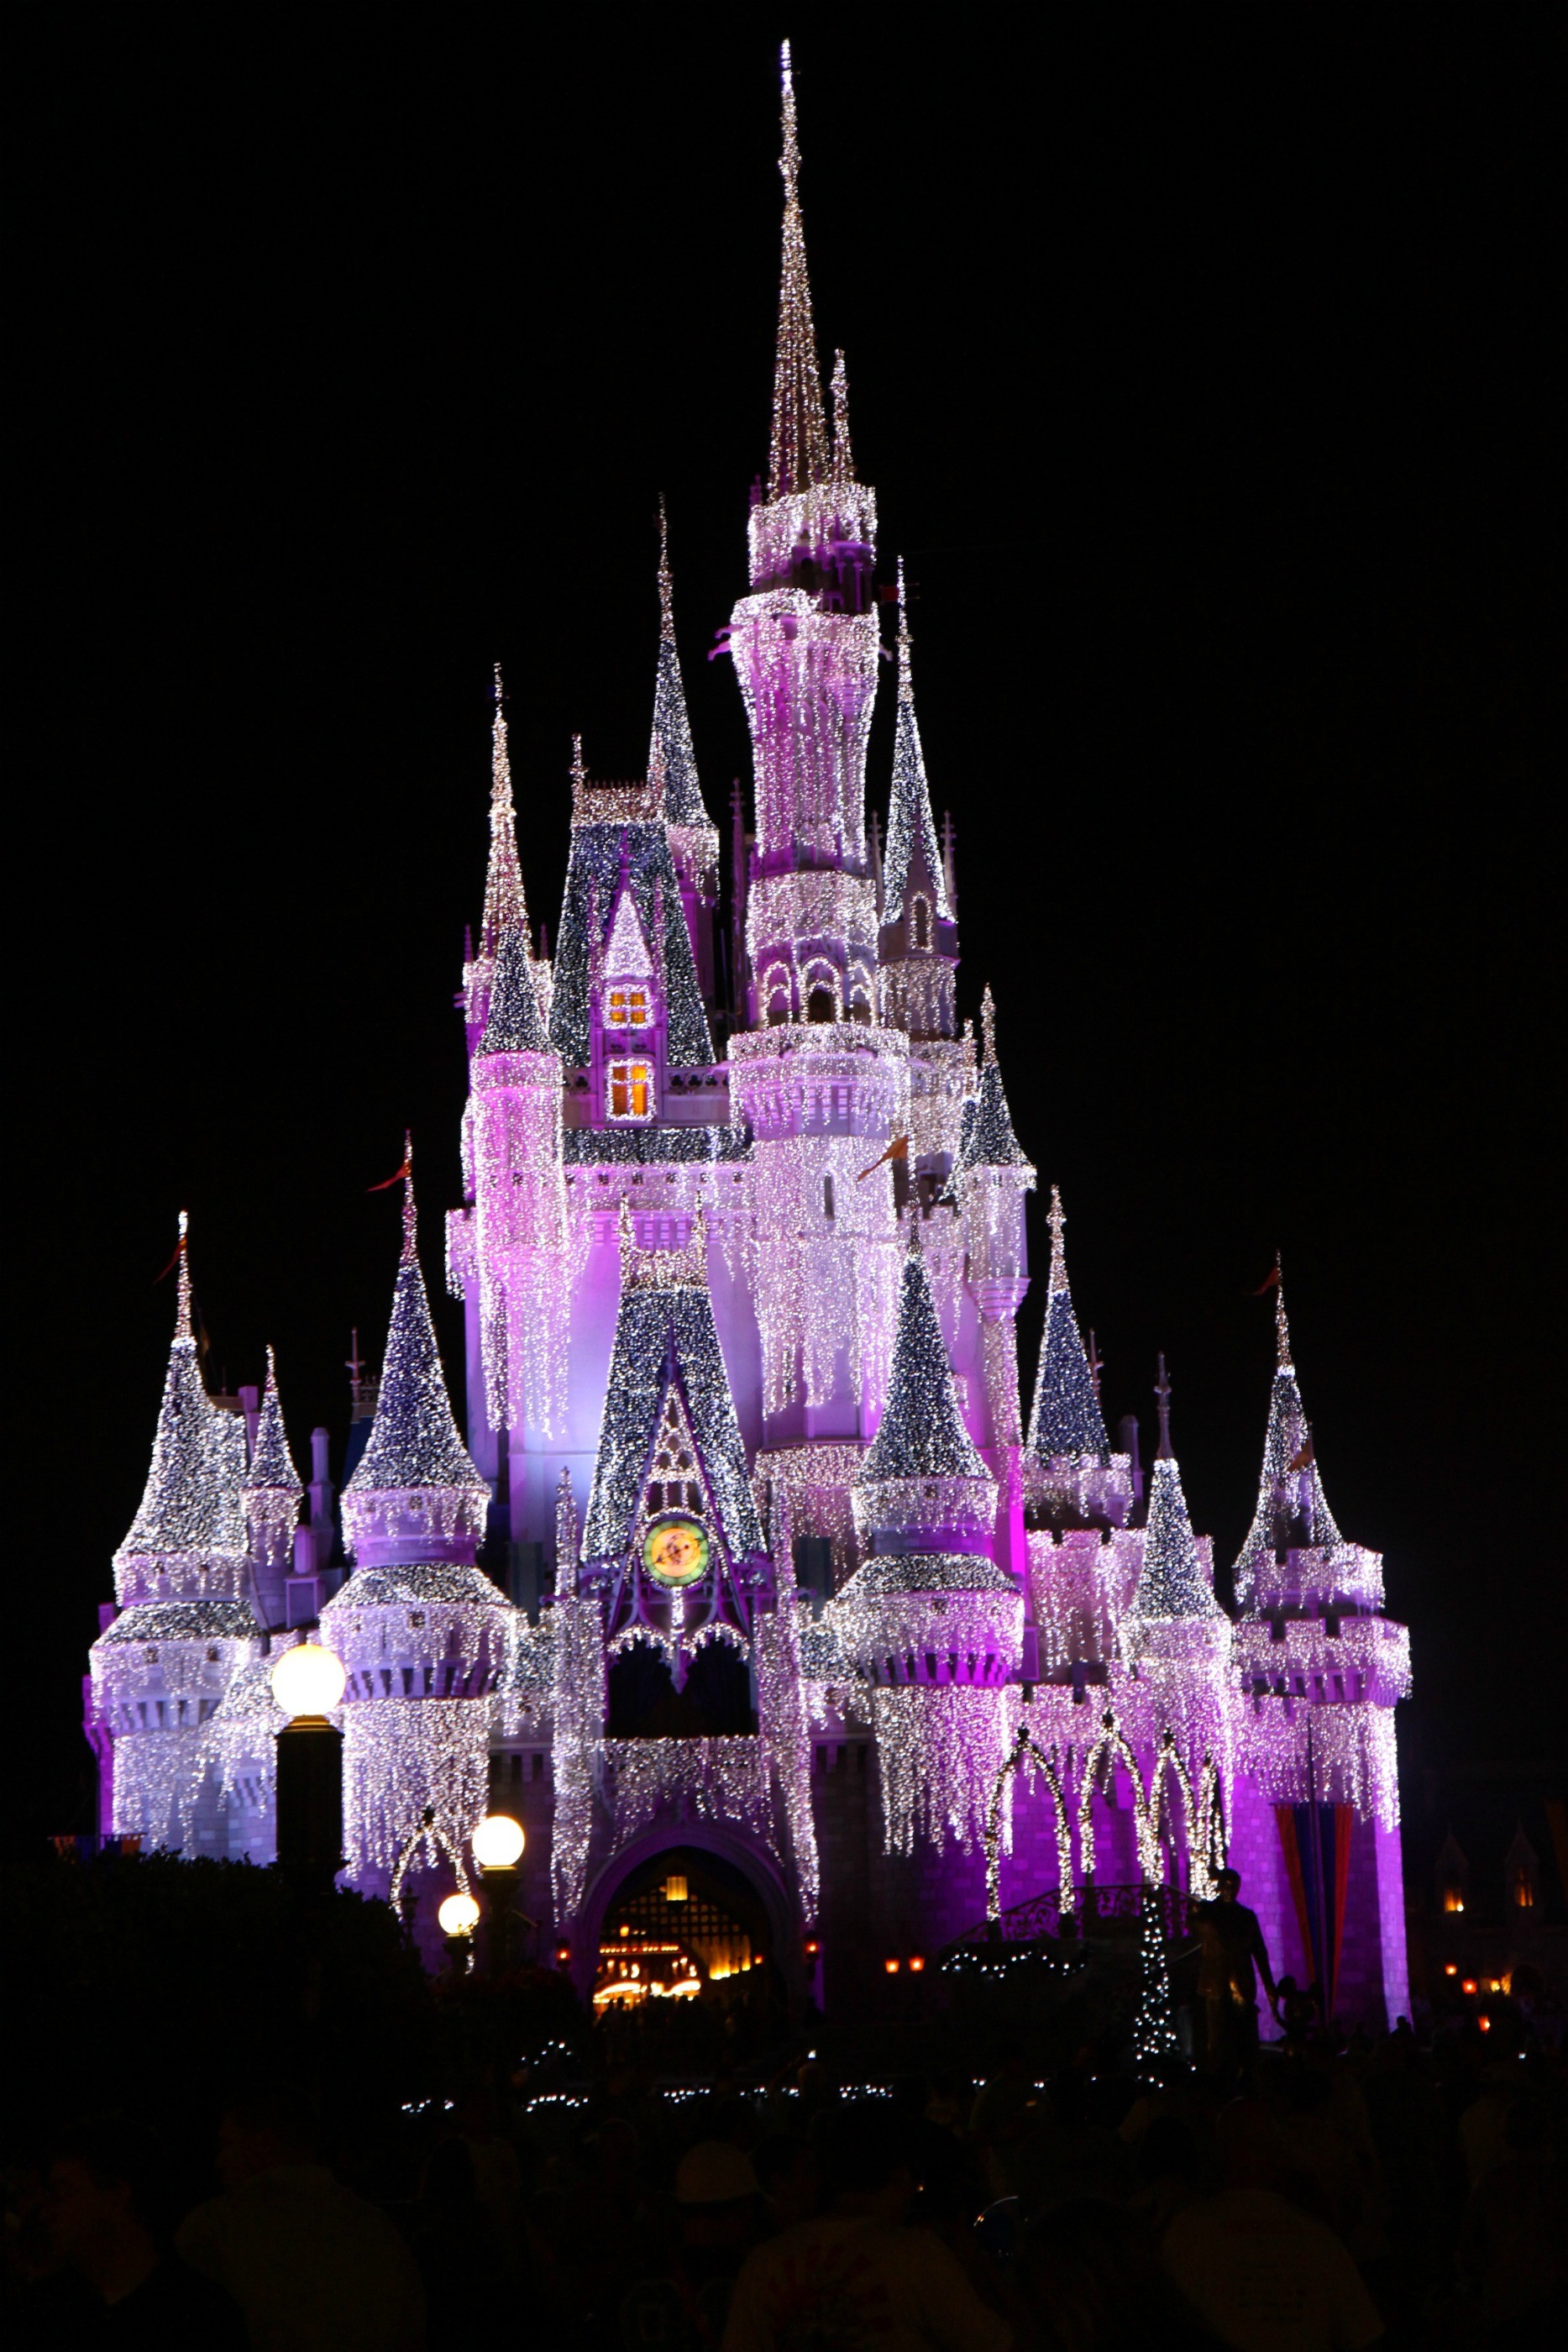 Iphone 5 Wallpaper Displaying 13 Images For Disney - Cinderella Castle - HD Wallpaper 